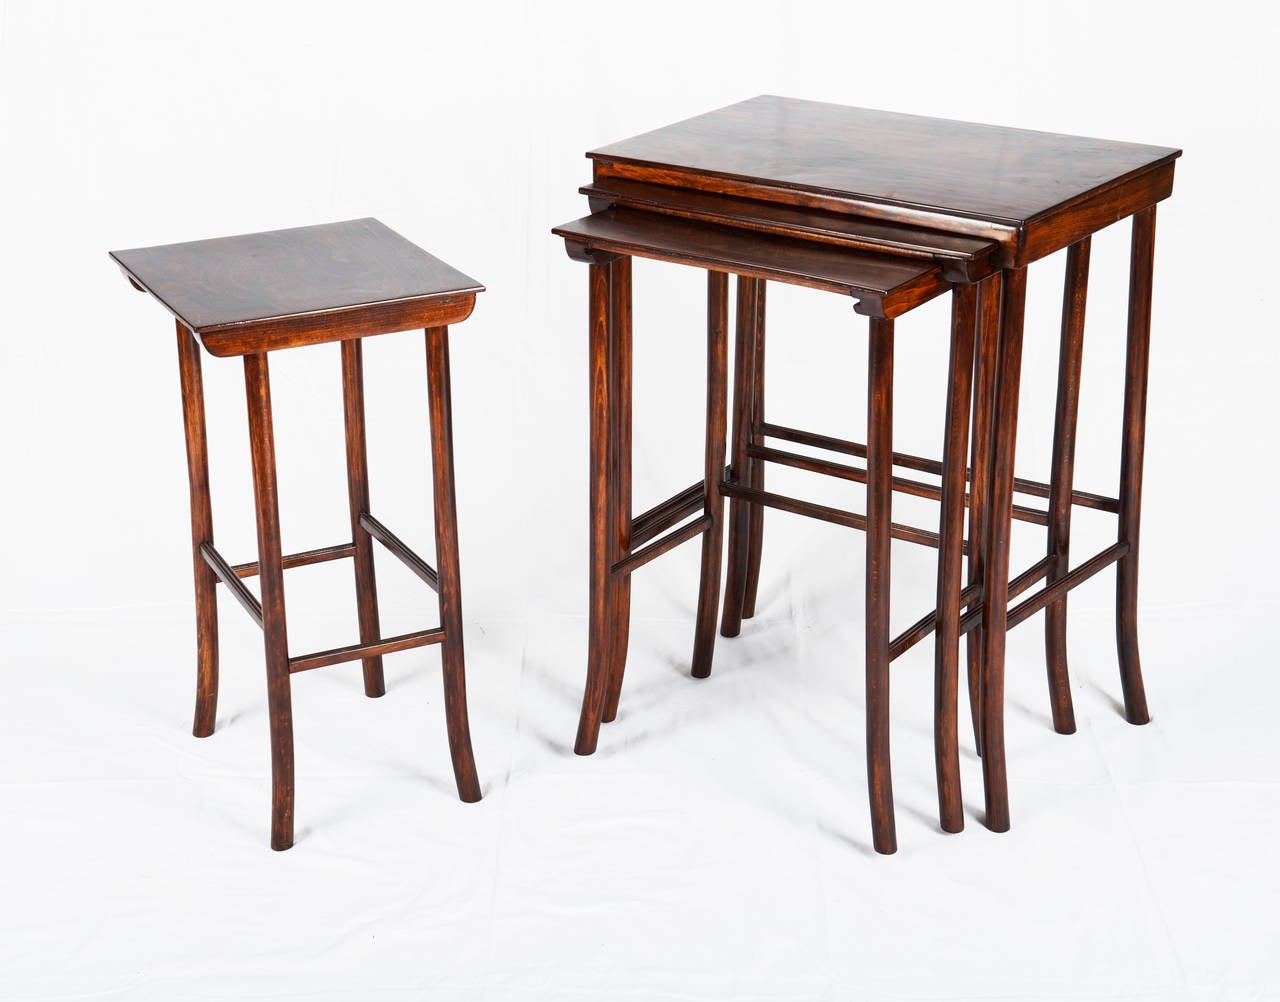 Set of four tables nesting attributed to Thonet
Beechwood and Plywood
fully restored